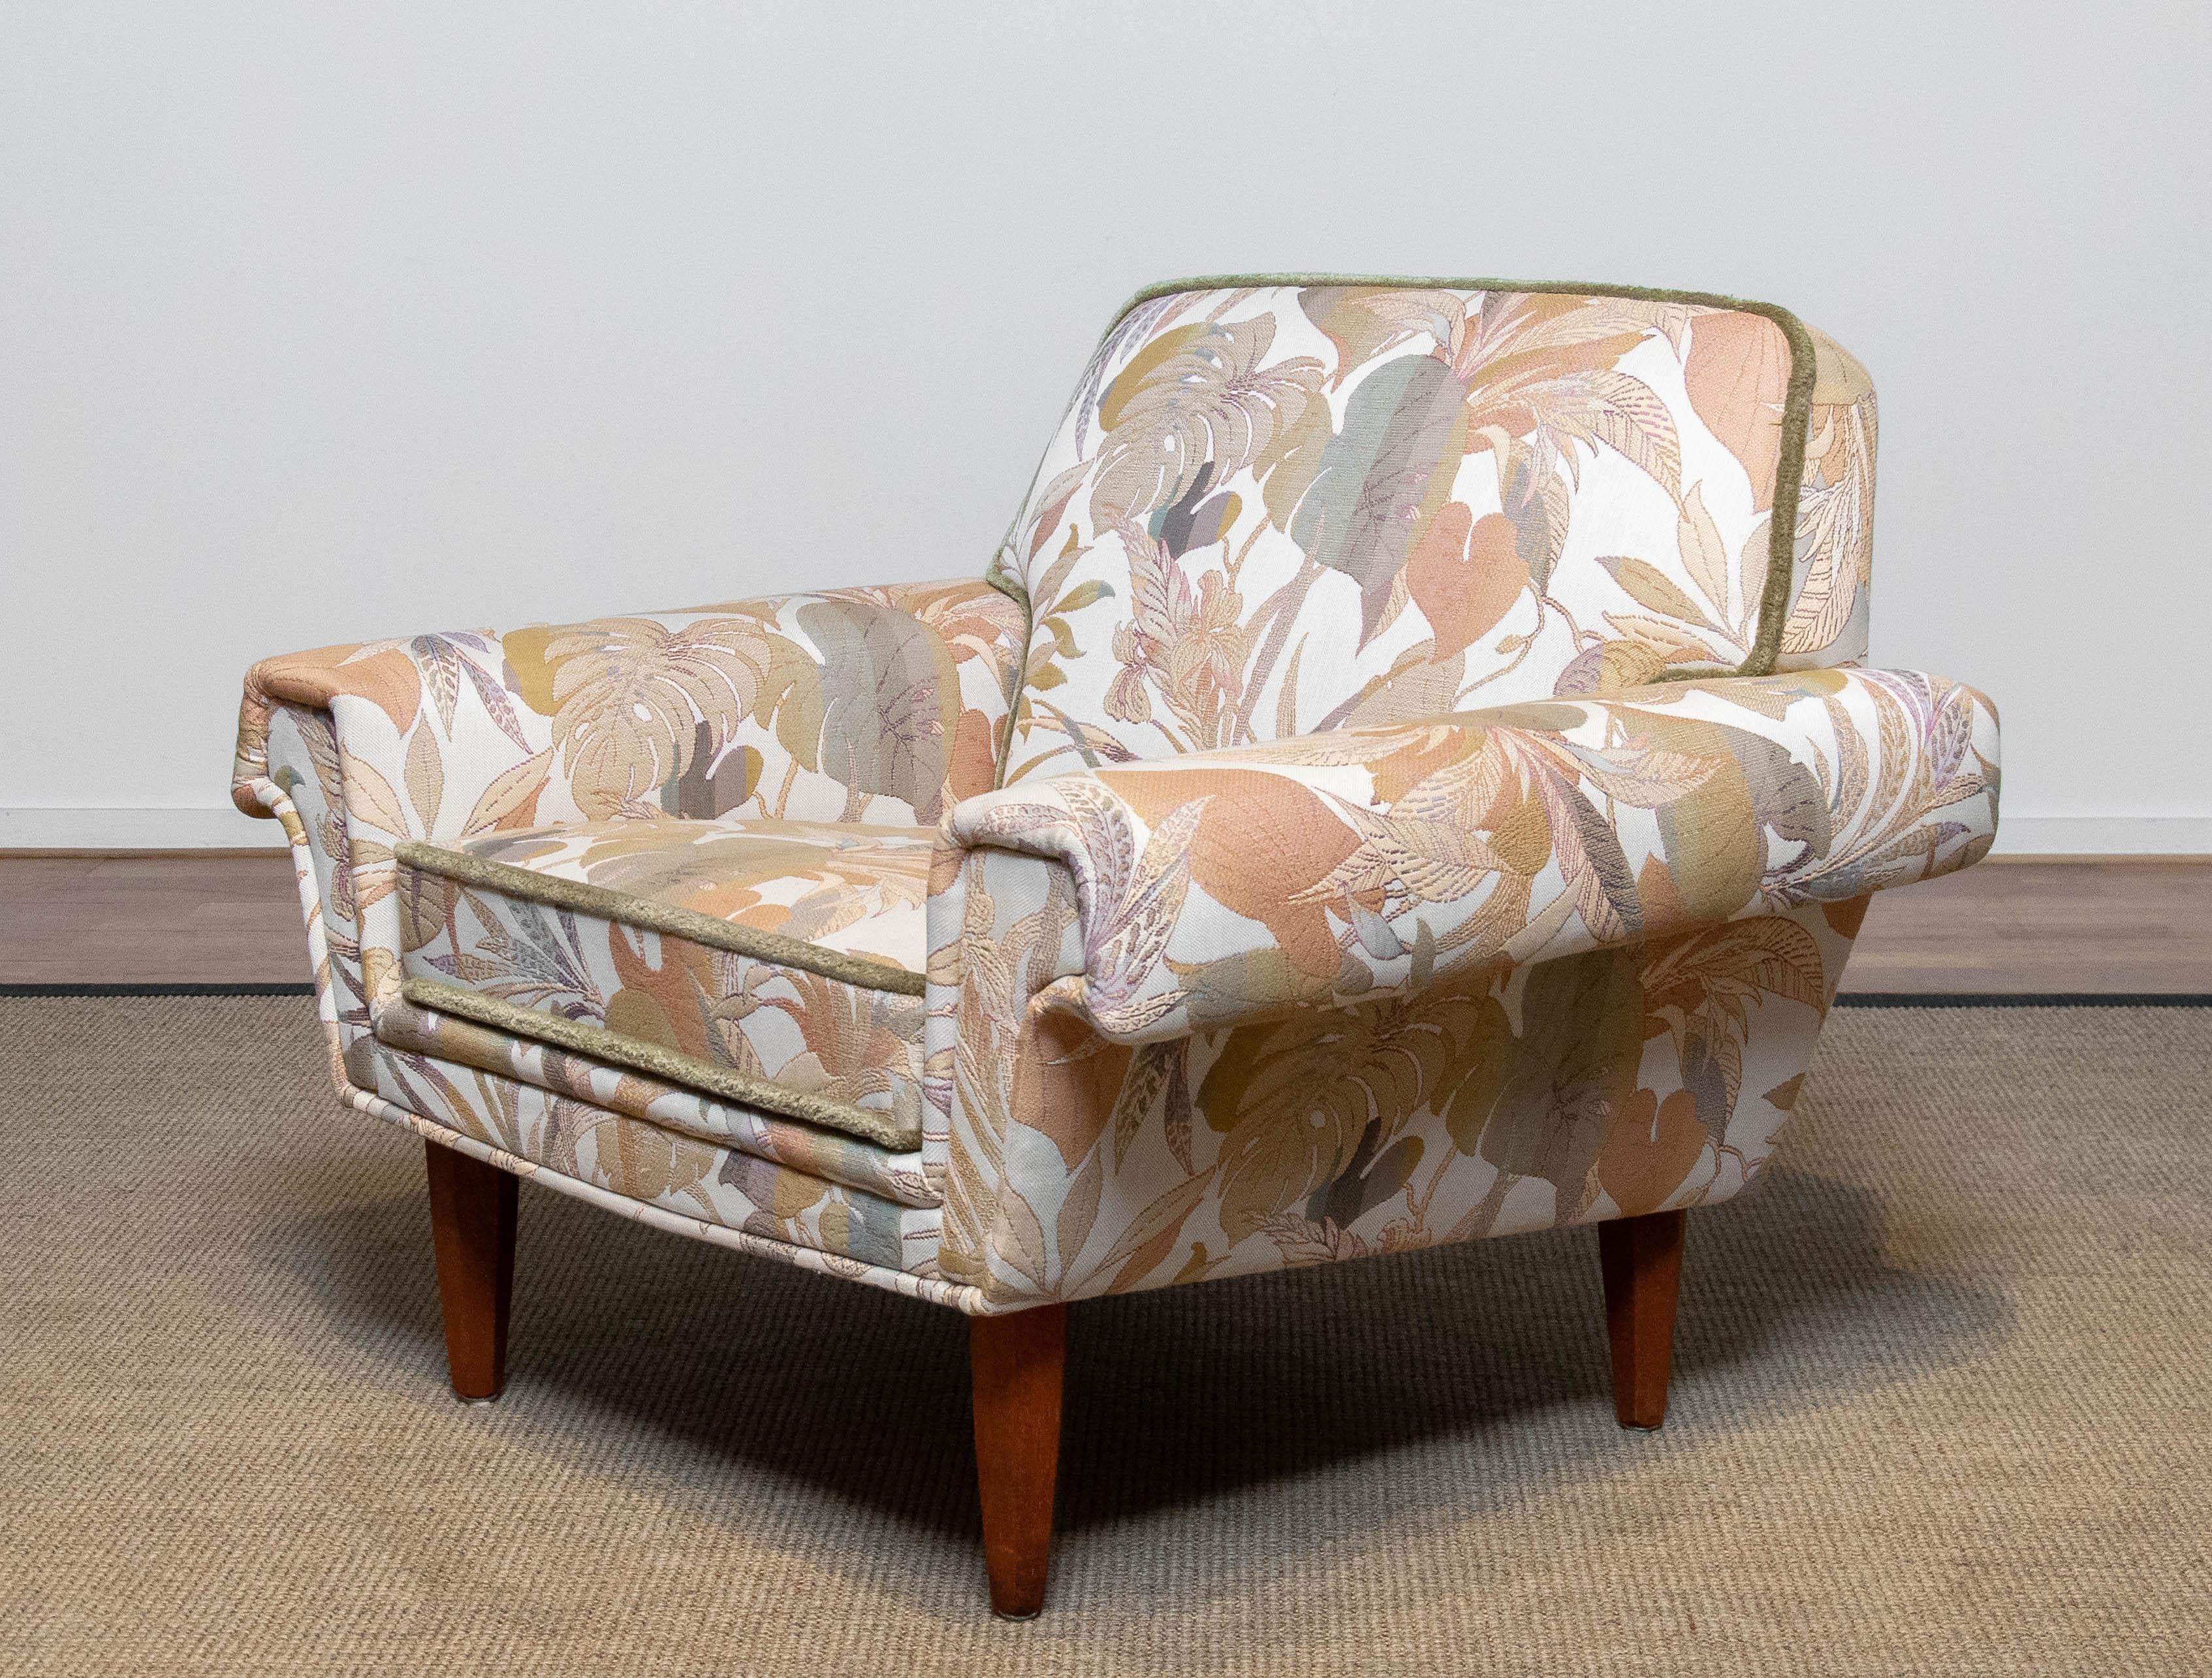 Danish Low Back Lounge Chair Upholstered Floral Jacquard Fabric from the 1970's For Sale 4